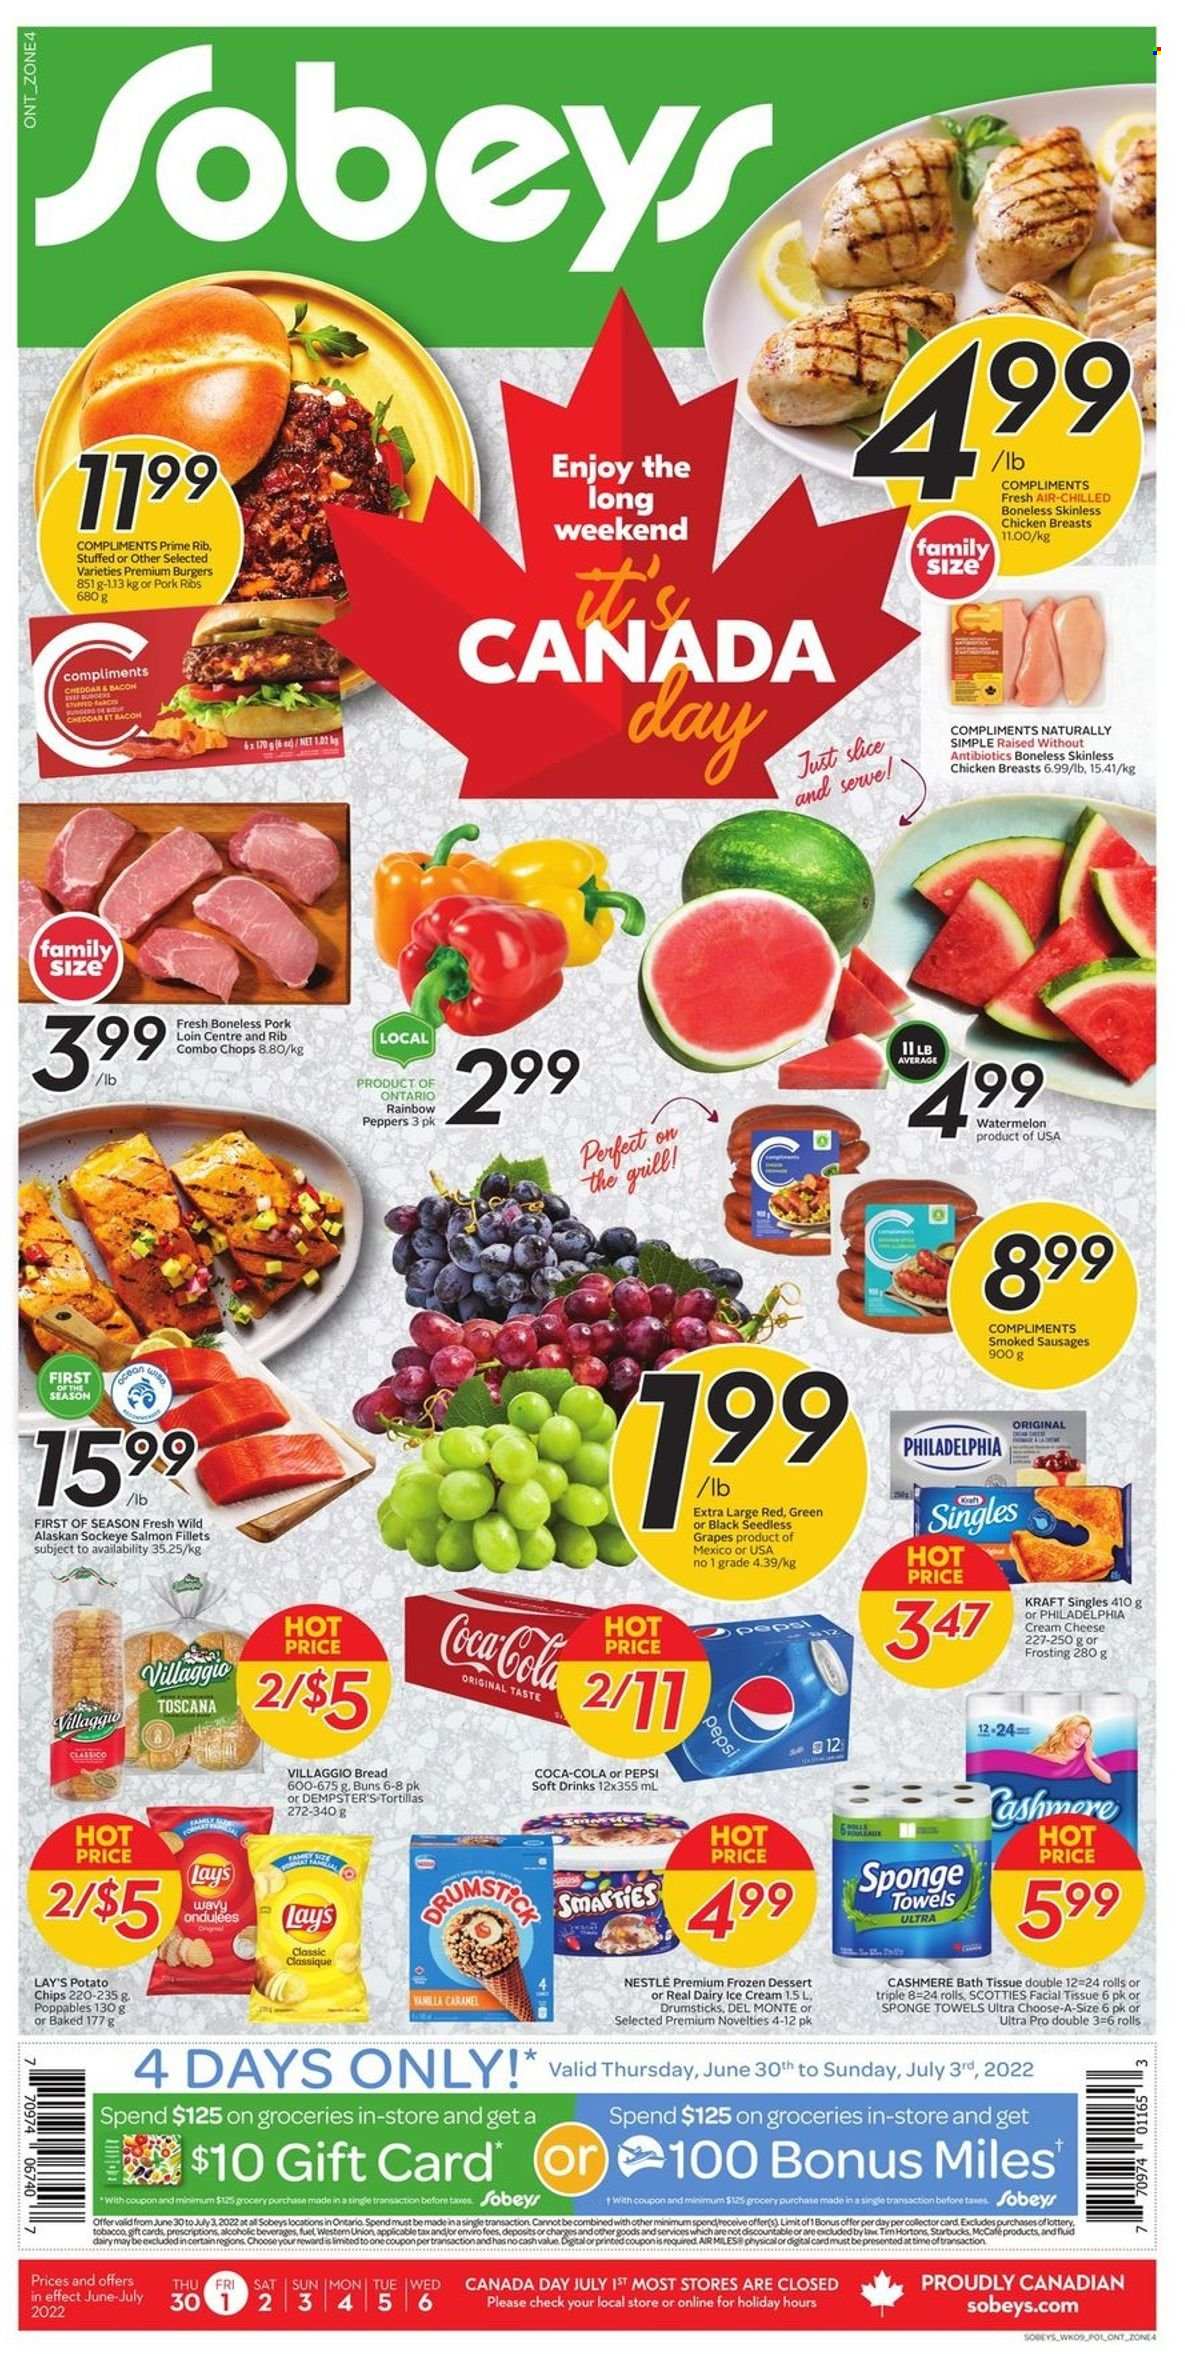 thumbnail - Sobeys Flyer - June 30, 2022 - July 06, 2022 - Sales products - bread, tortillas, buns, peppers, grapes, seedless grapes, watermelon, salmon, salmon fillet, hamburger, Kraft®, bacon, sausage, sandwich slices, cheese, Kraft Singles, ice cream, potato chips, Lay’s, frosting, caramel, Classico, Coca-Cola, Pepsi, soft drink, Starbucks, McCafe, chicken breasts, pork loin, pork meat, pork ribs, bath tissue, grill, Nestlé, Philadelphia. Page 1.